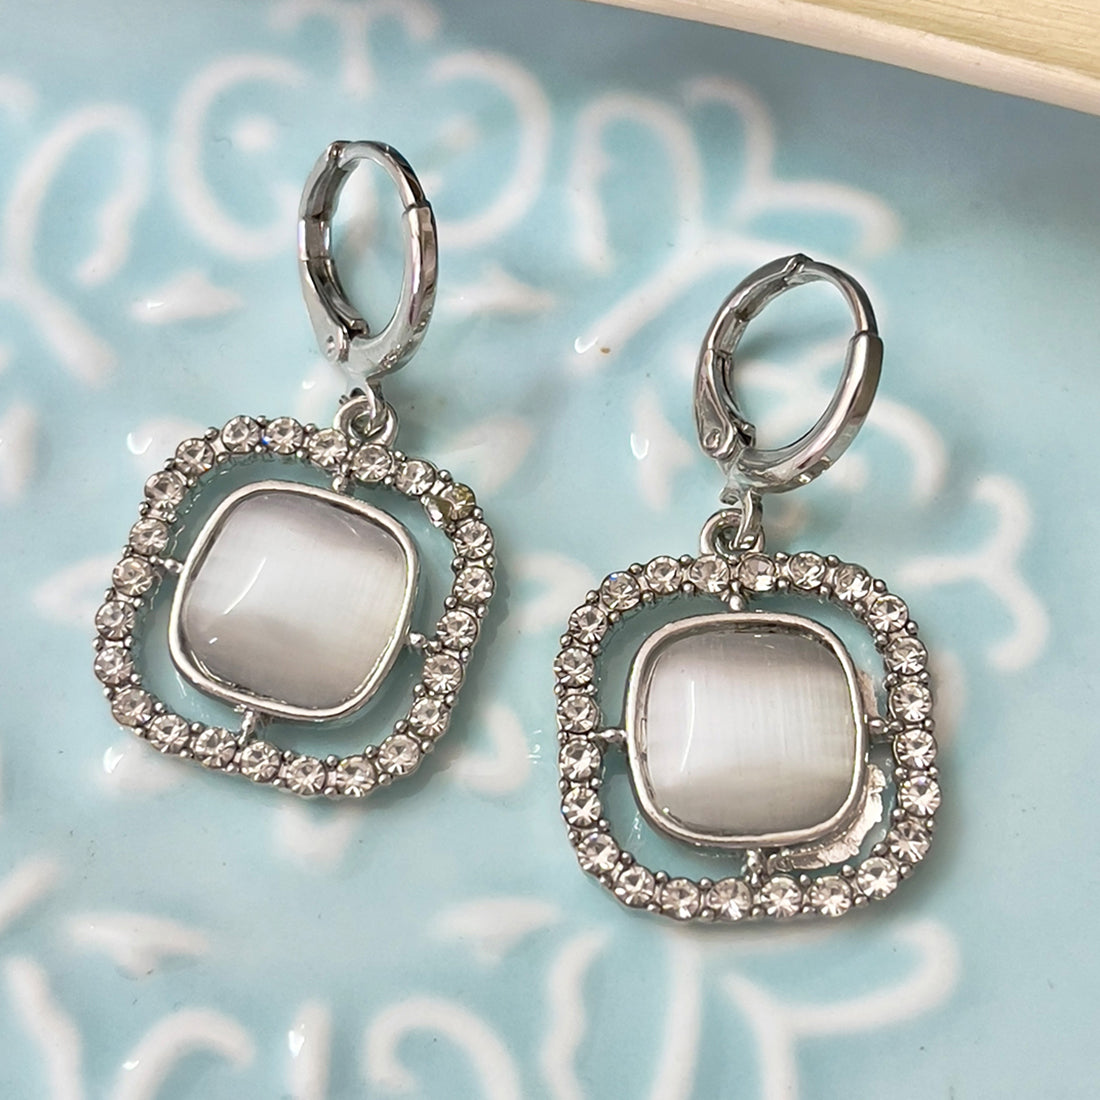 Square White Moonstone With Diamante Studs Silver-Toned Hoop Drop Earrings